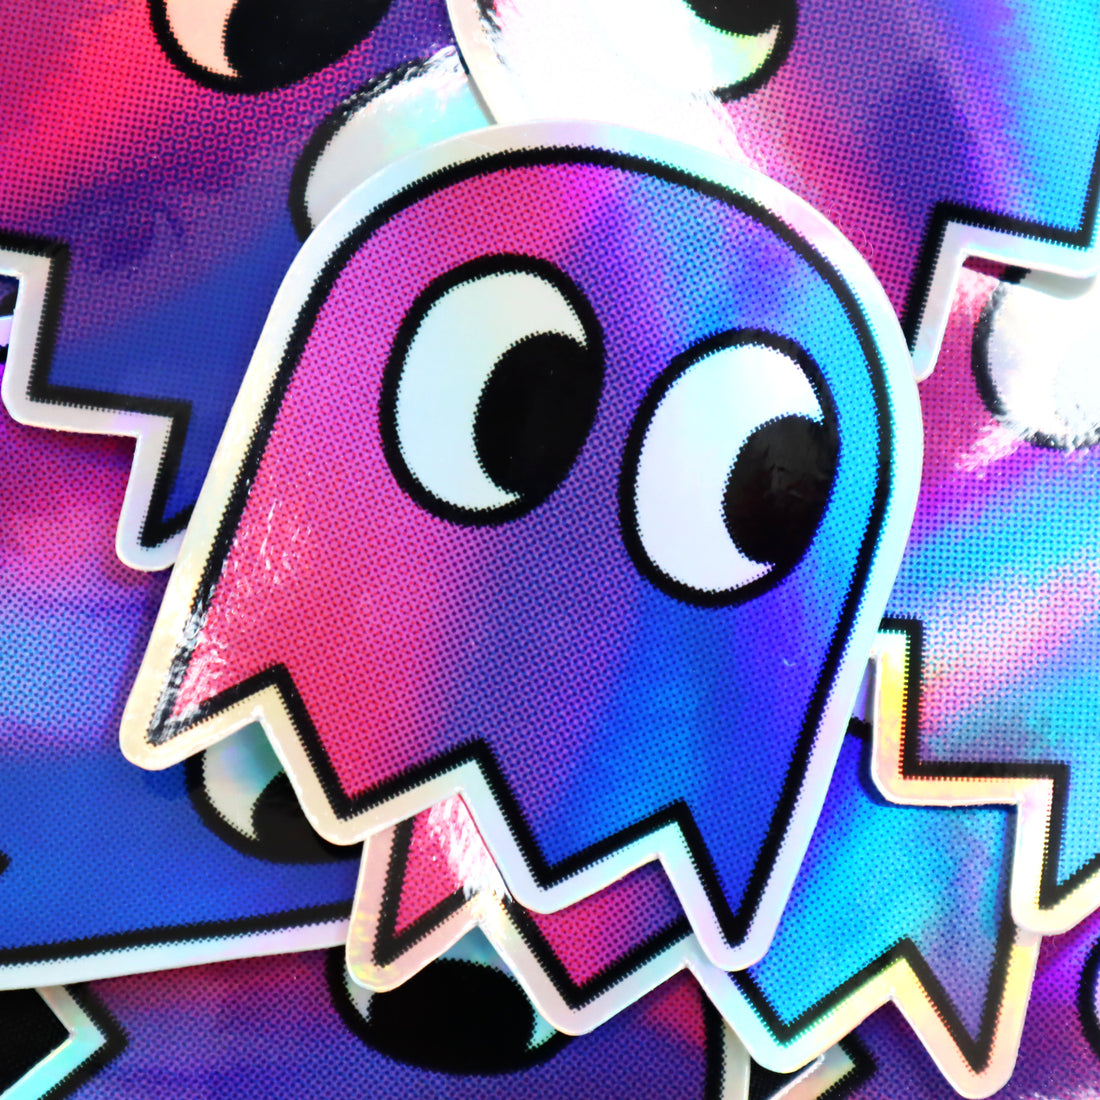 A bunch of holographic vinyl stickers, depicting a gamer-style pixel ghost in bisexual flag colours.